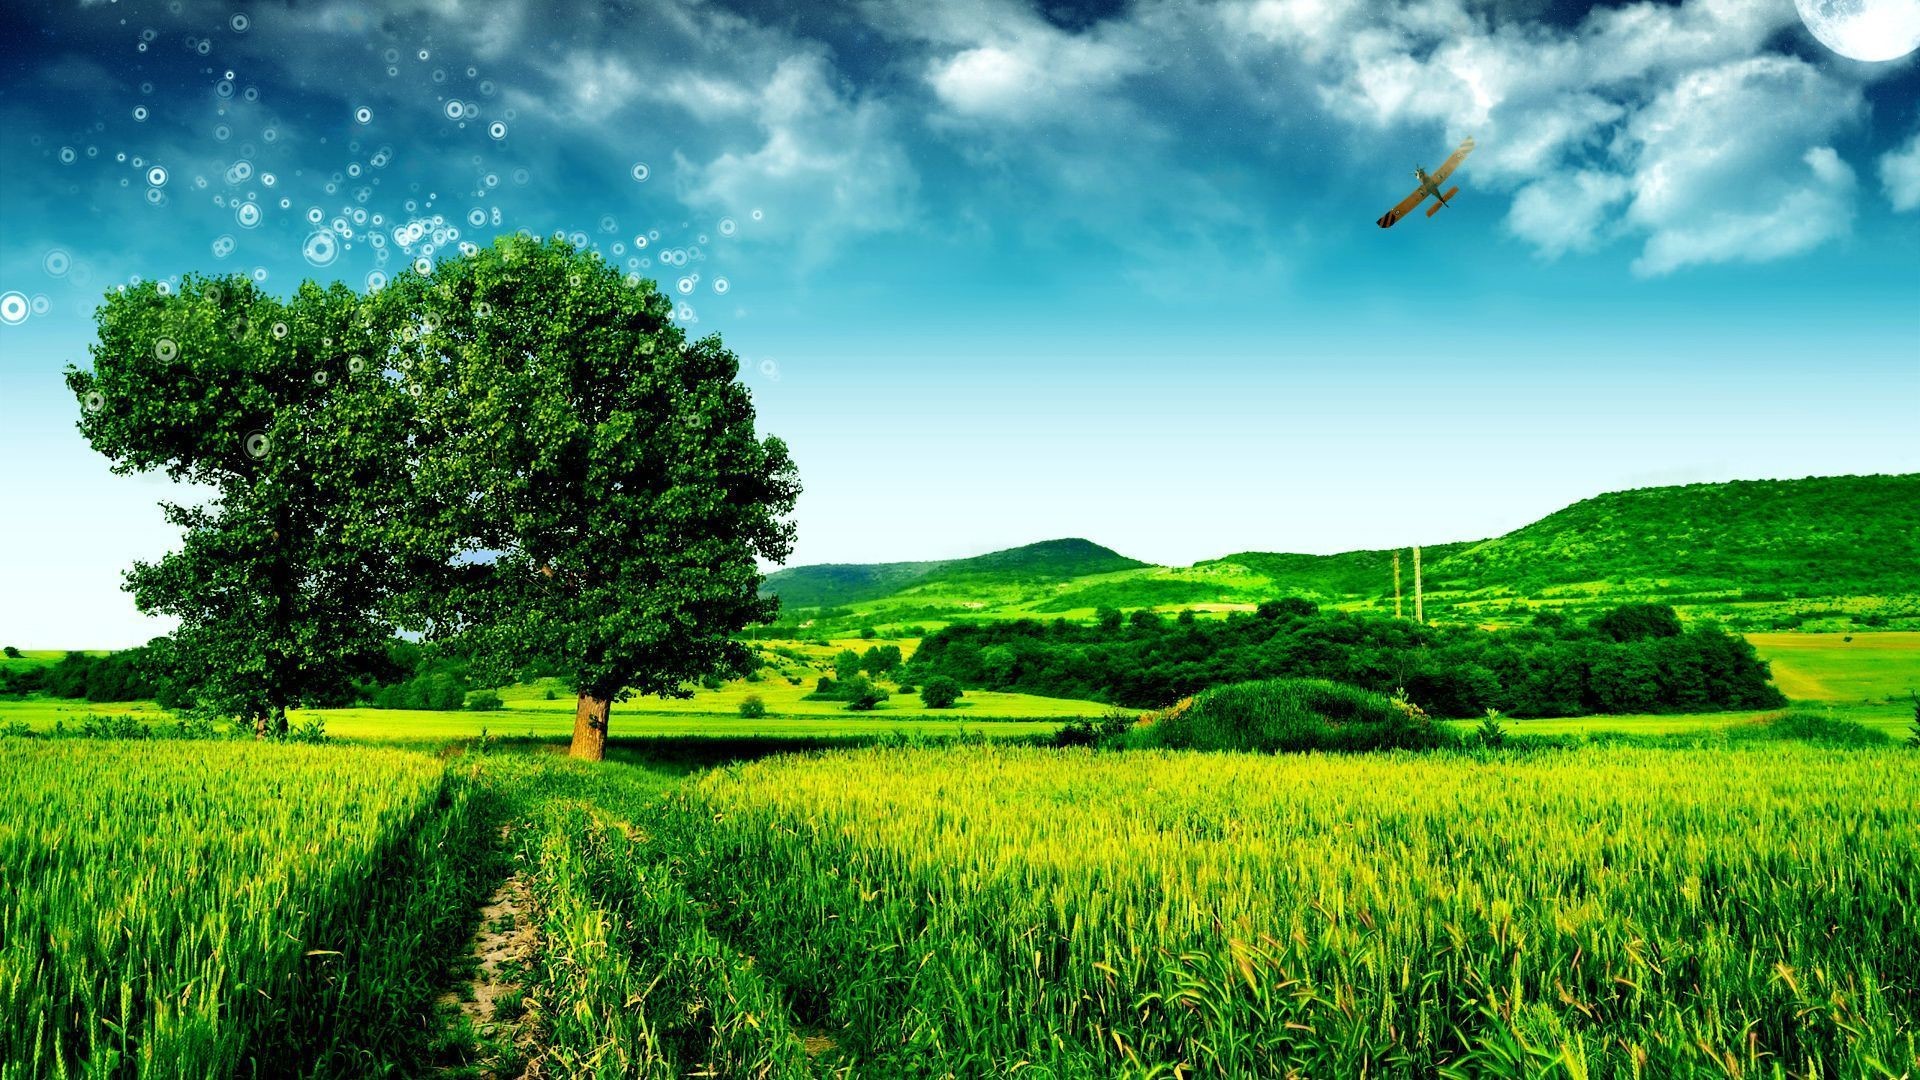 1920x1080 Green Landscape Wallpaper (with Low Flying Plane)